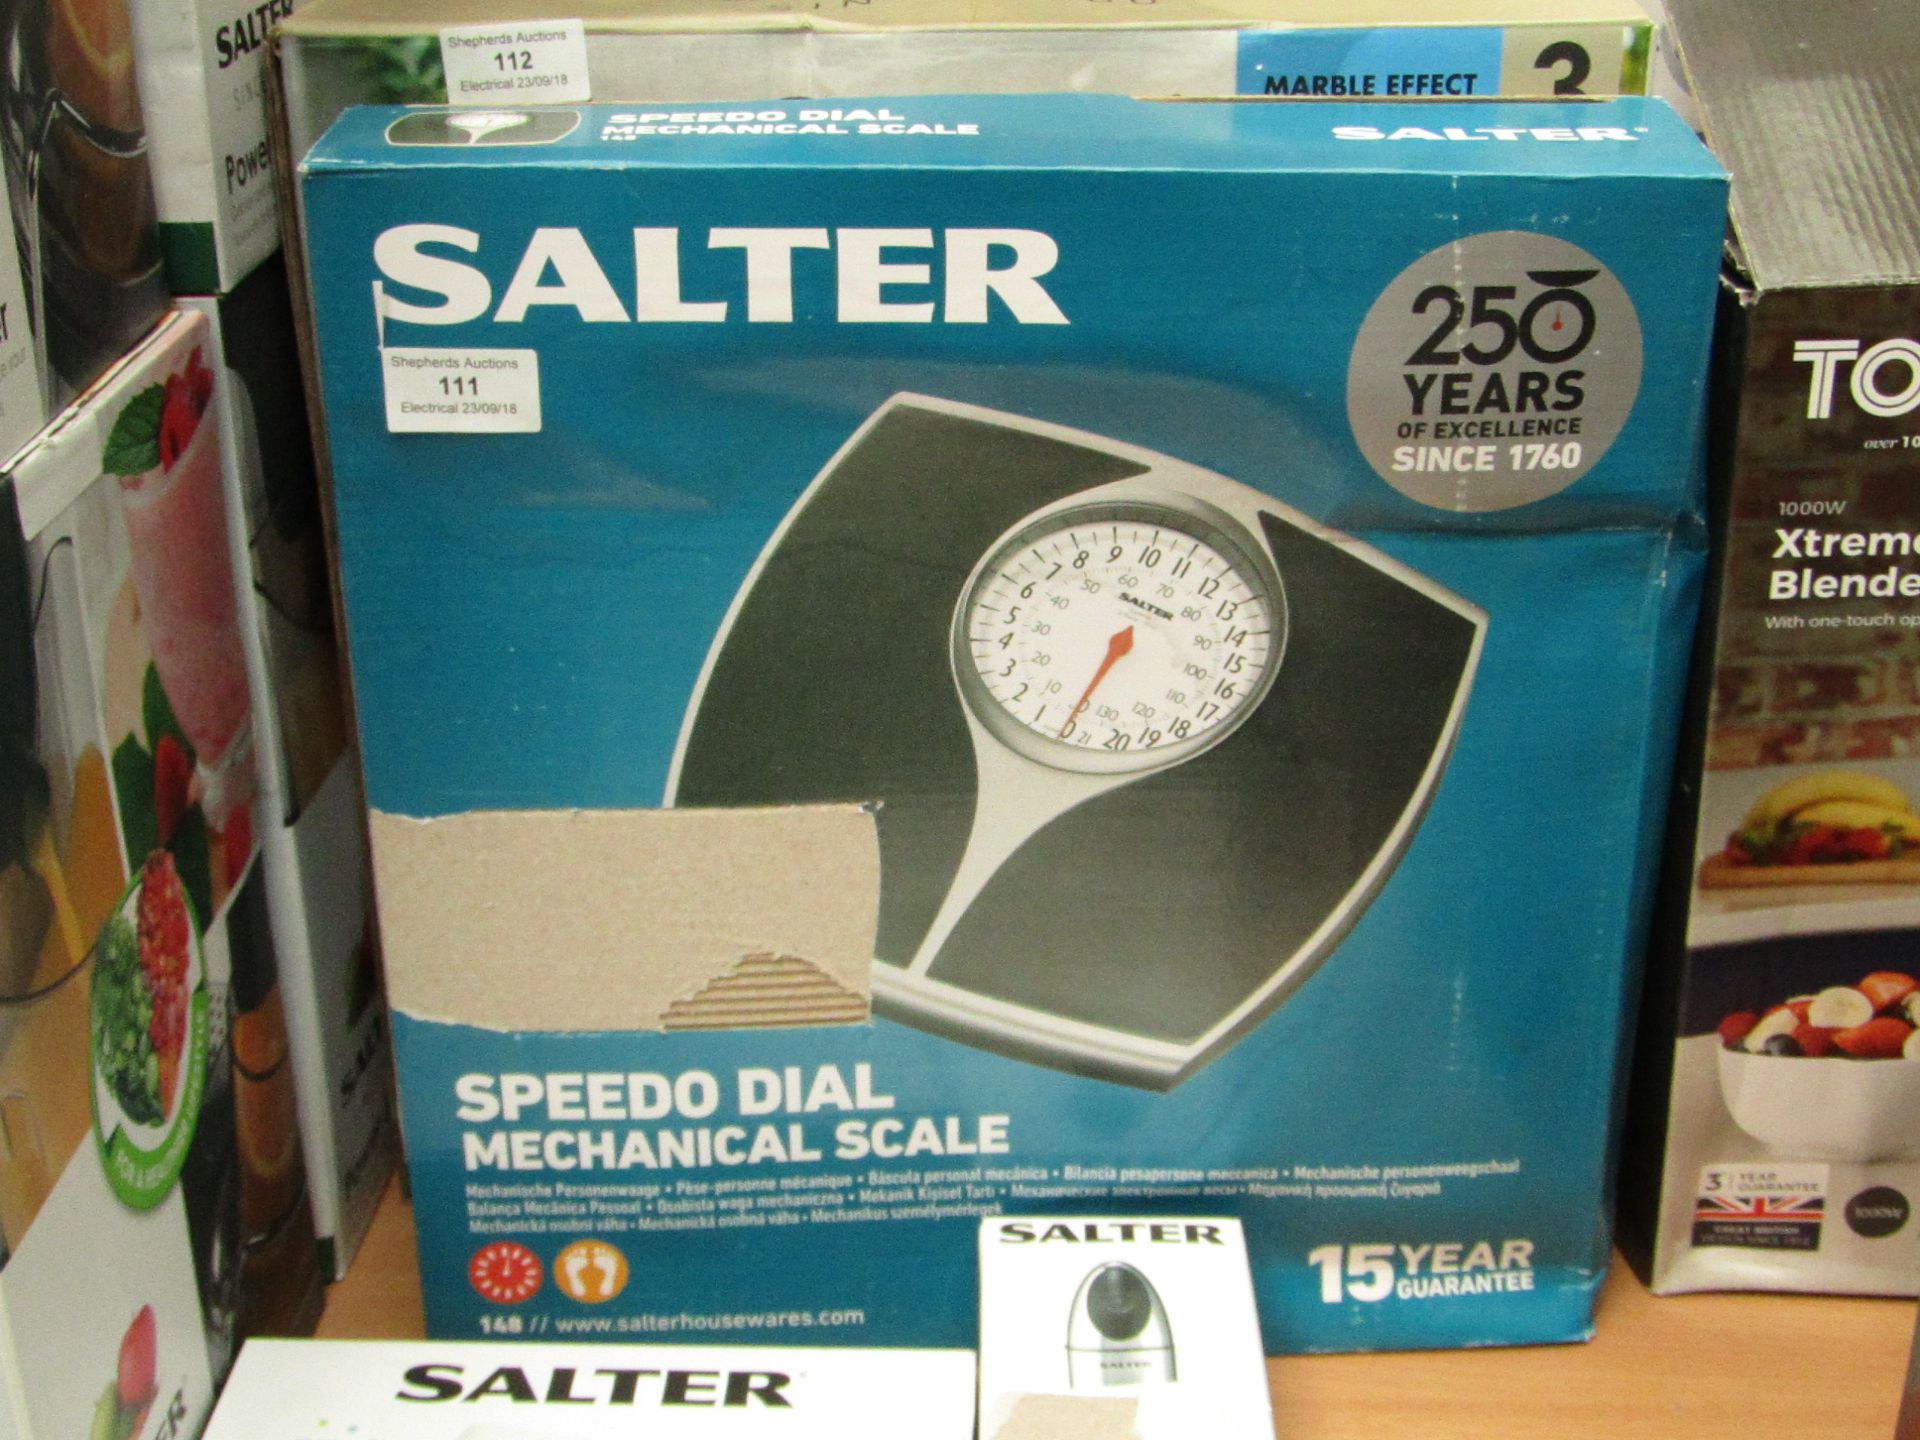 Salter Speedo Dial mechanical scale, untested and boxed.